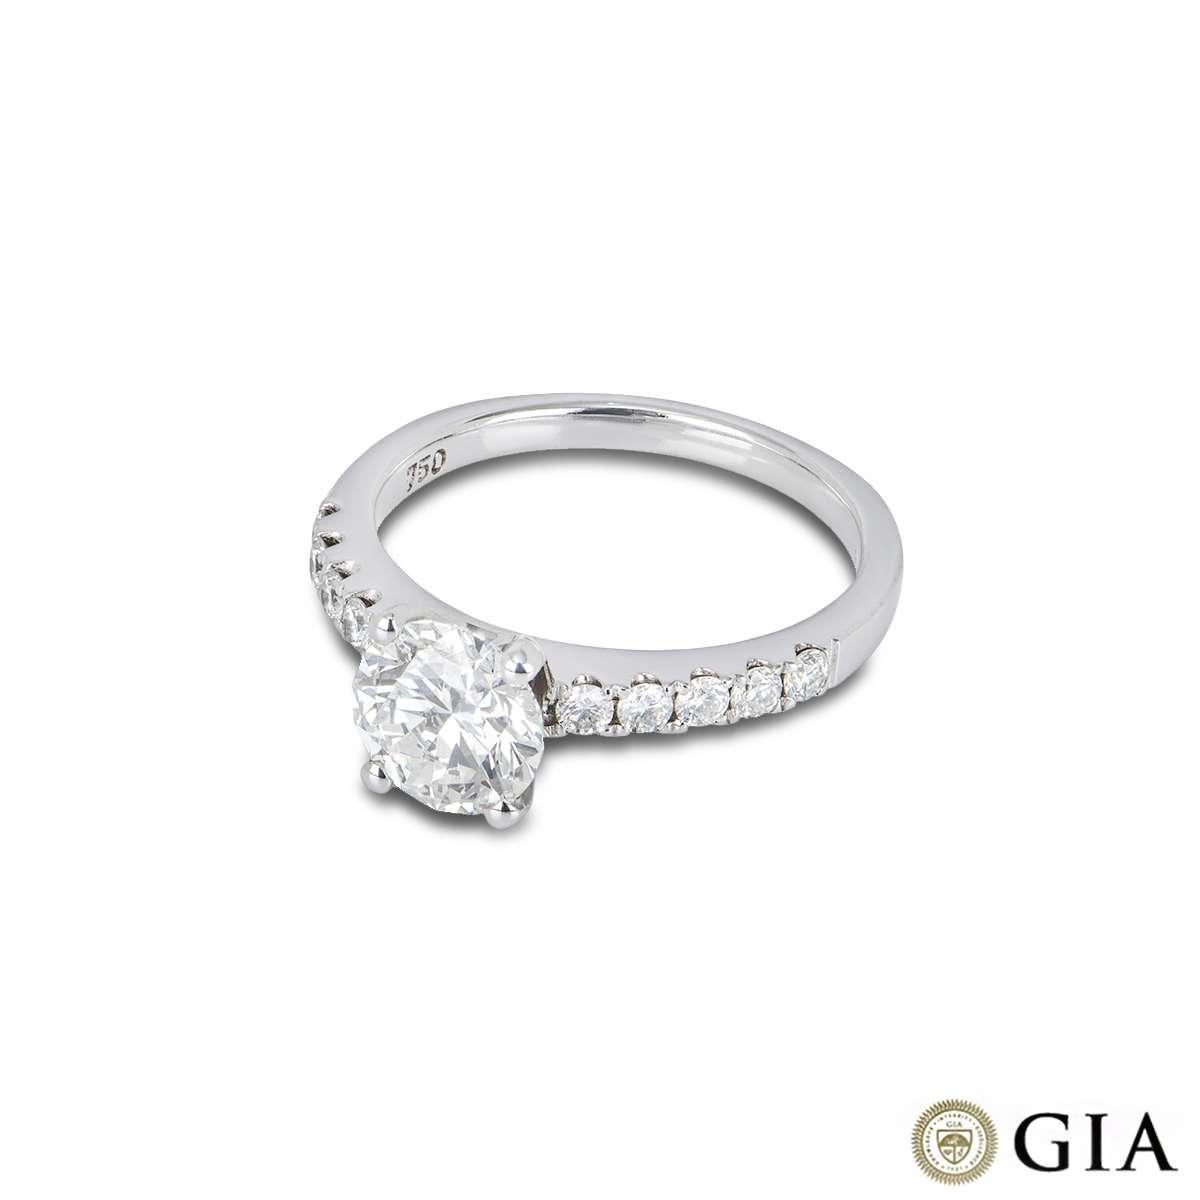 GIA Certified White Gold Round Brilliant Cut Diamond Ring 1.23ct H/VS1 XXX In New Condition For Sale In London, GB